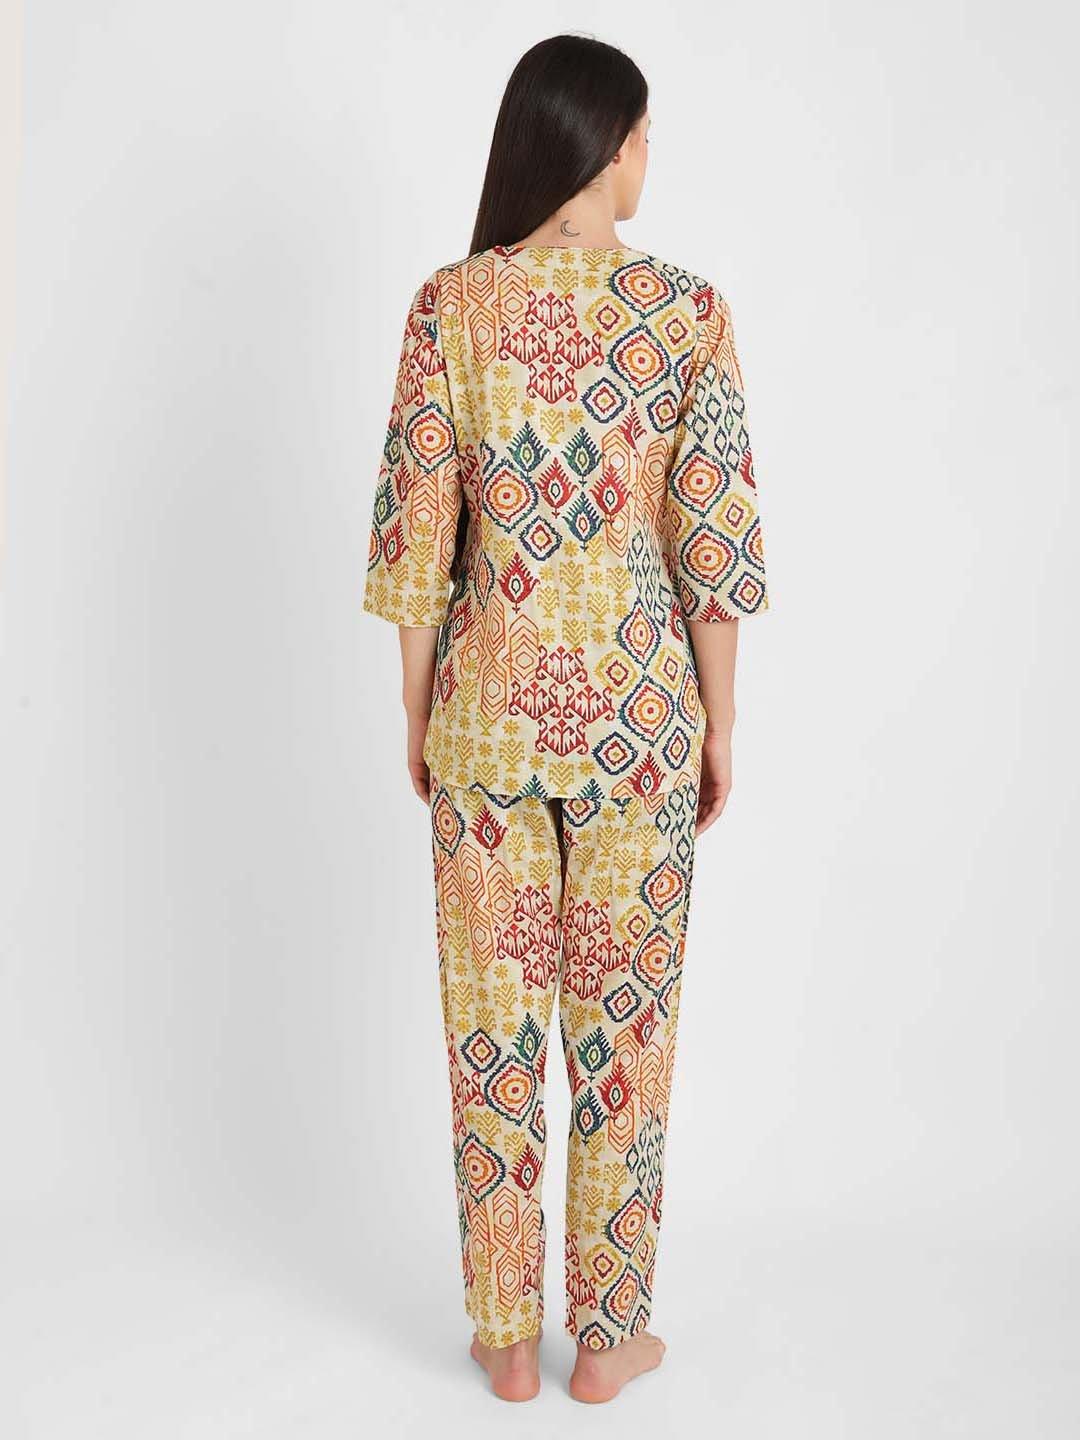 Ikat is Love Printed Nightsuit Set for Women